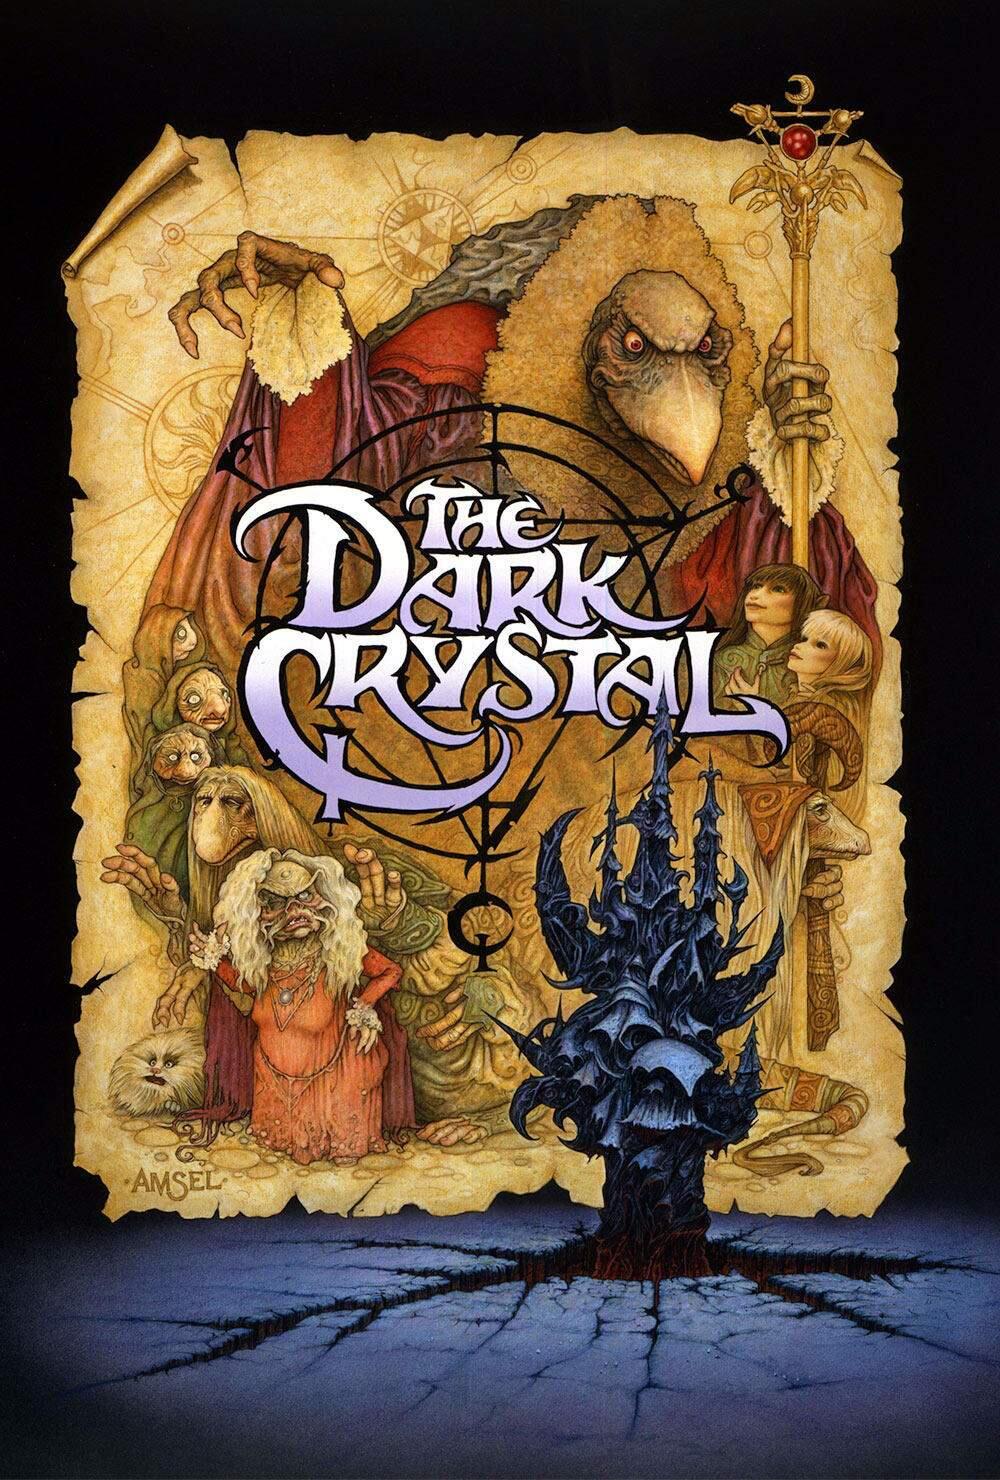 'The Dark Crystal' returns to the big screen this weekend for a series of special showings.